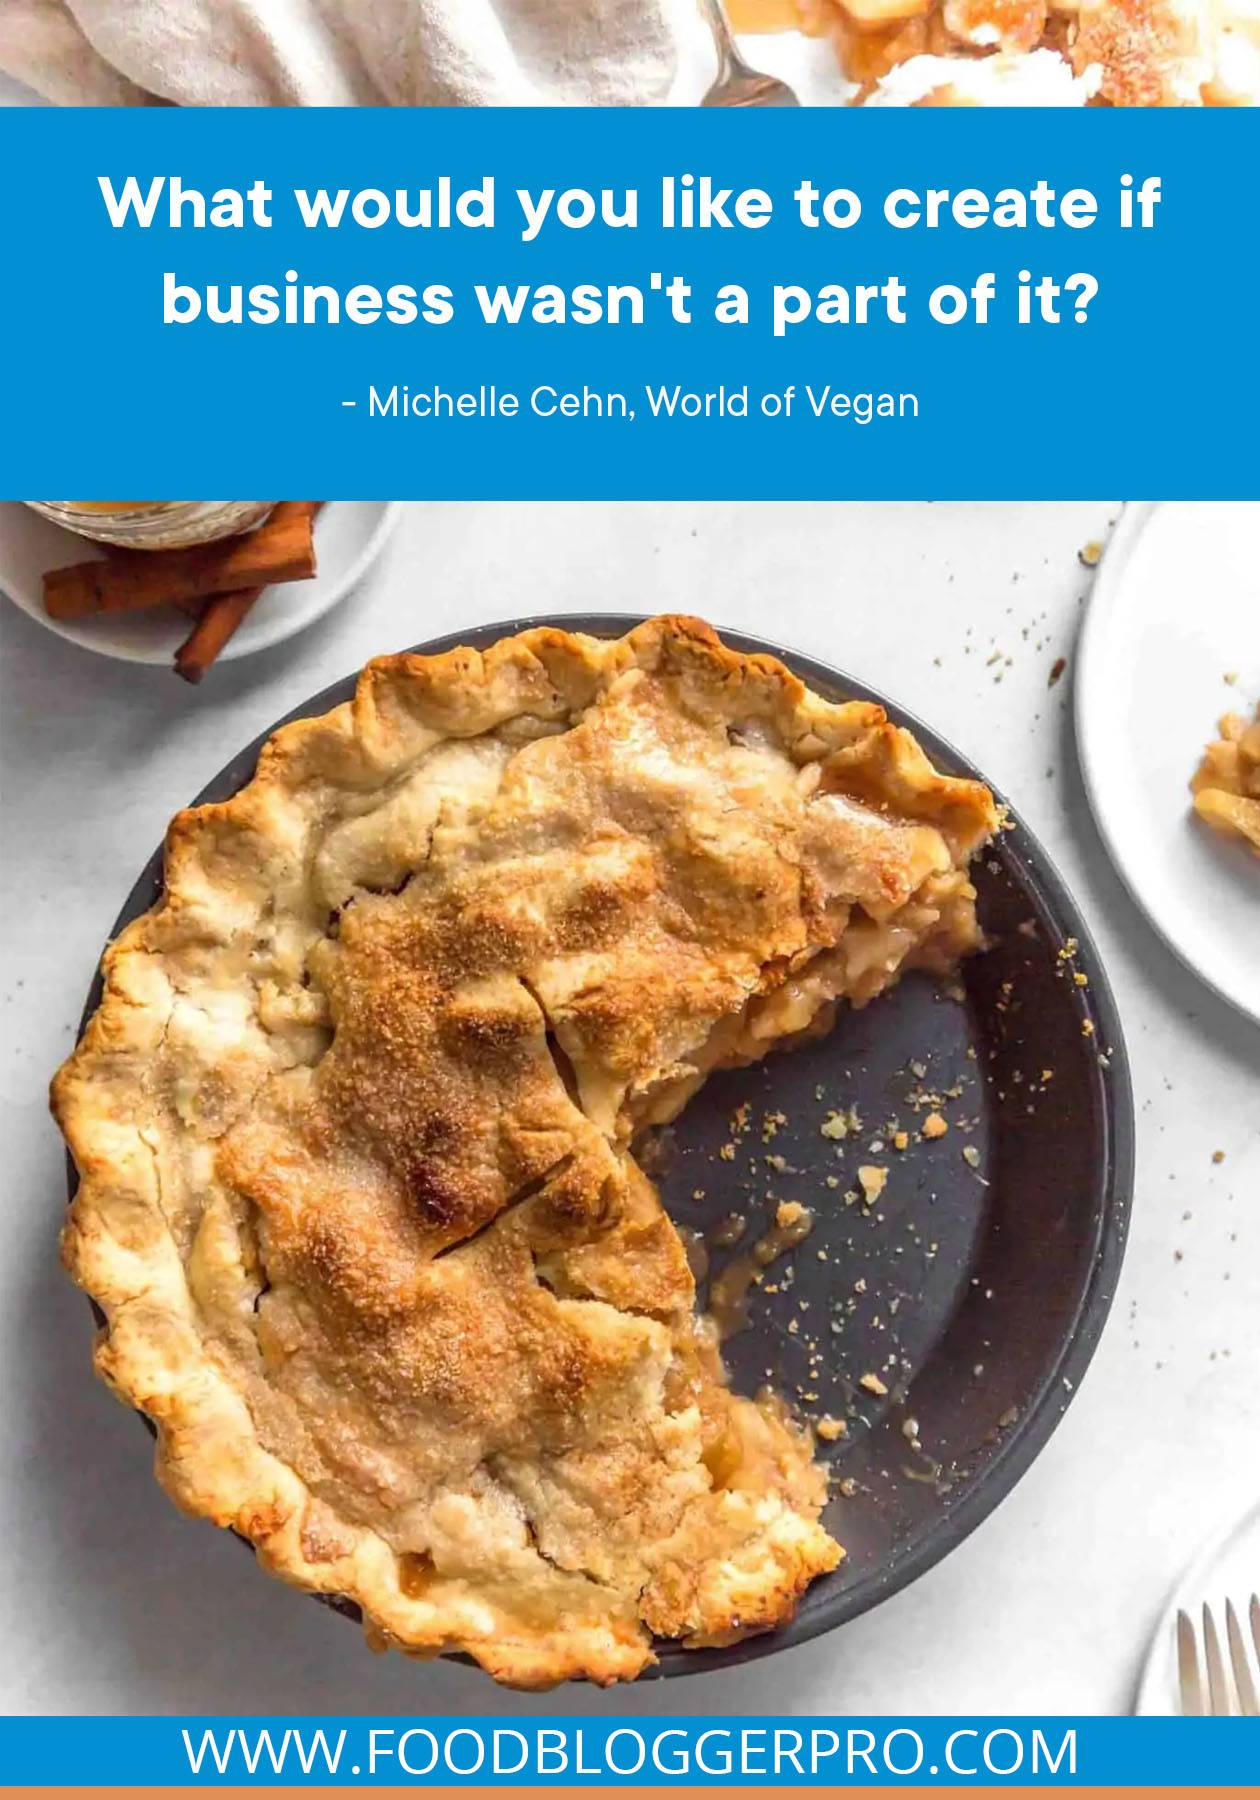 A photograph of an apple pie with a quote from Michelle Cehn's episode of The Food Blogger Pro Podcast, "What would you like to create if business wasn't a part of it?"